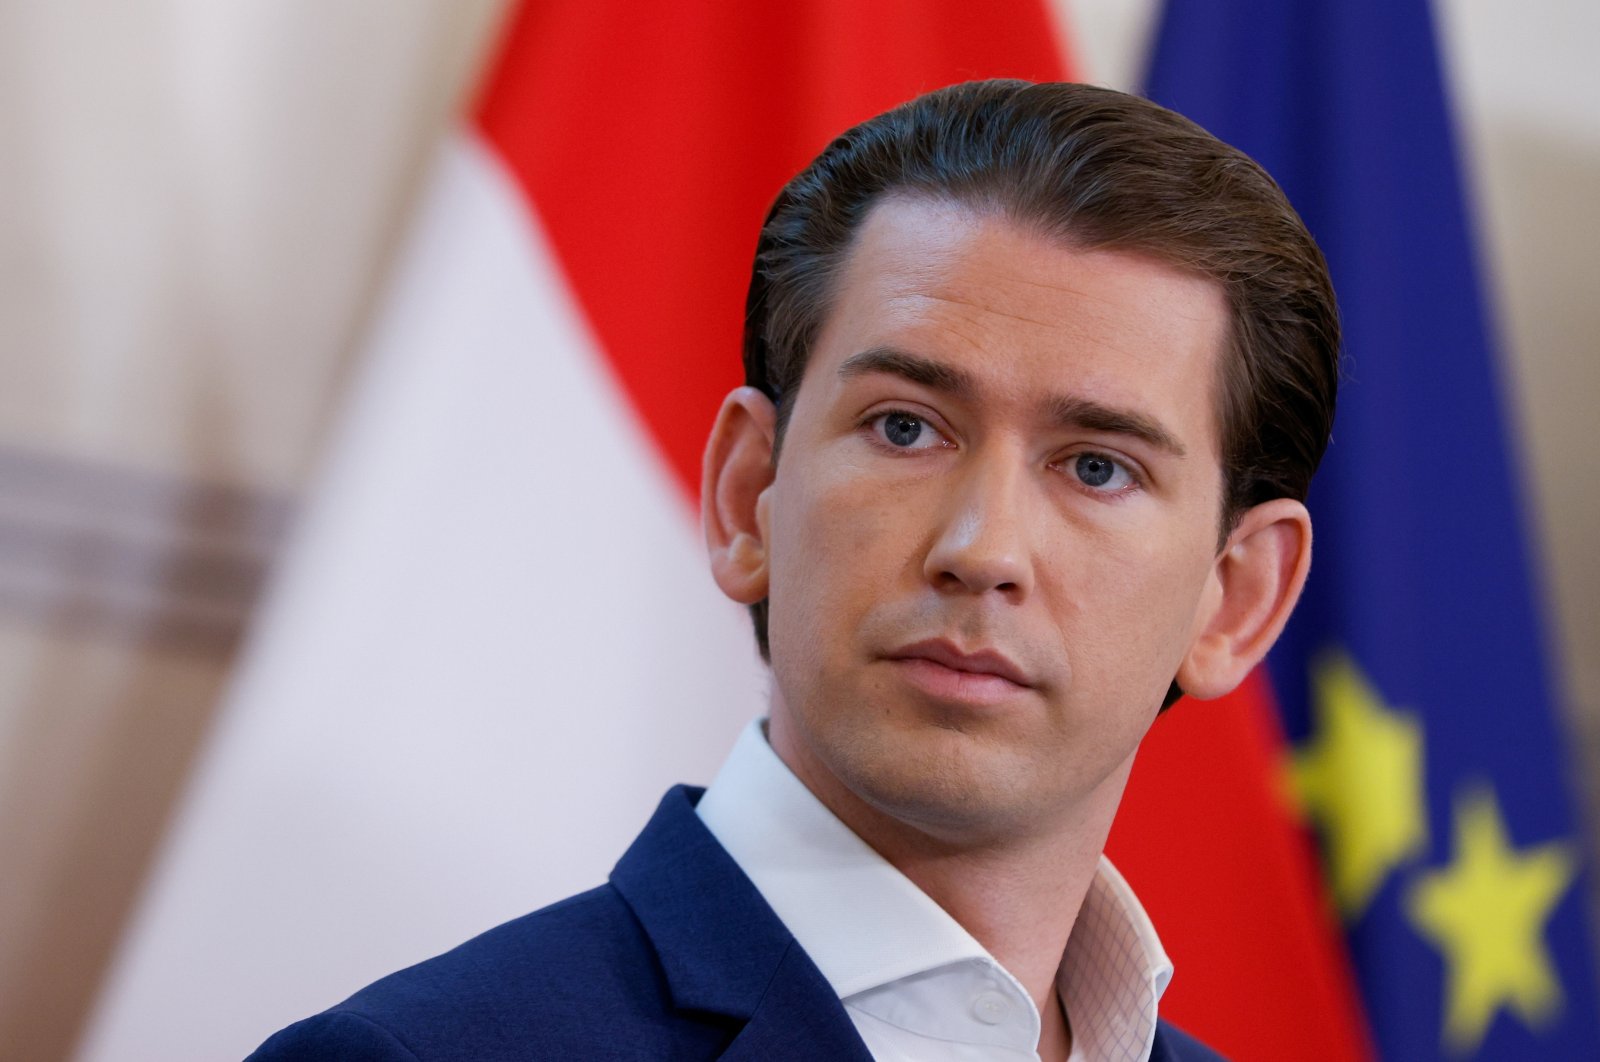 Austrian Chancellor Sebastian Kurz attends a news conference, as the spread of the COVID-19 pandemic continues, in Vienna, Austria, Sept. 8, 2021. (Reuters Photo)